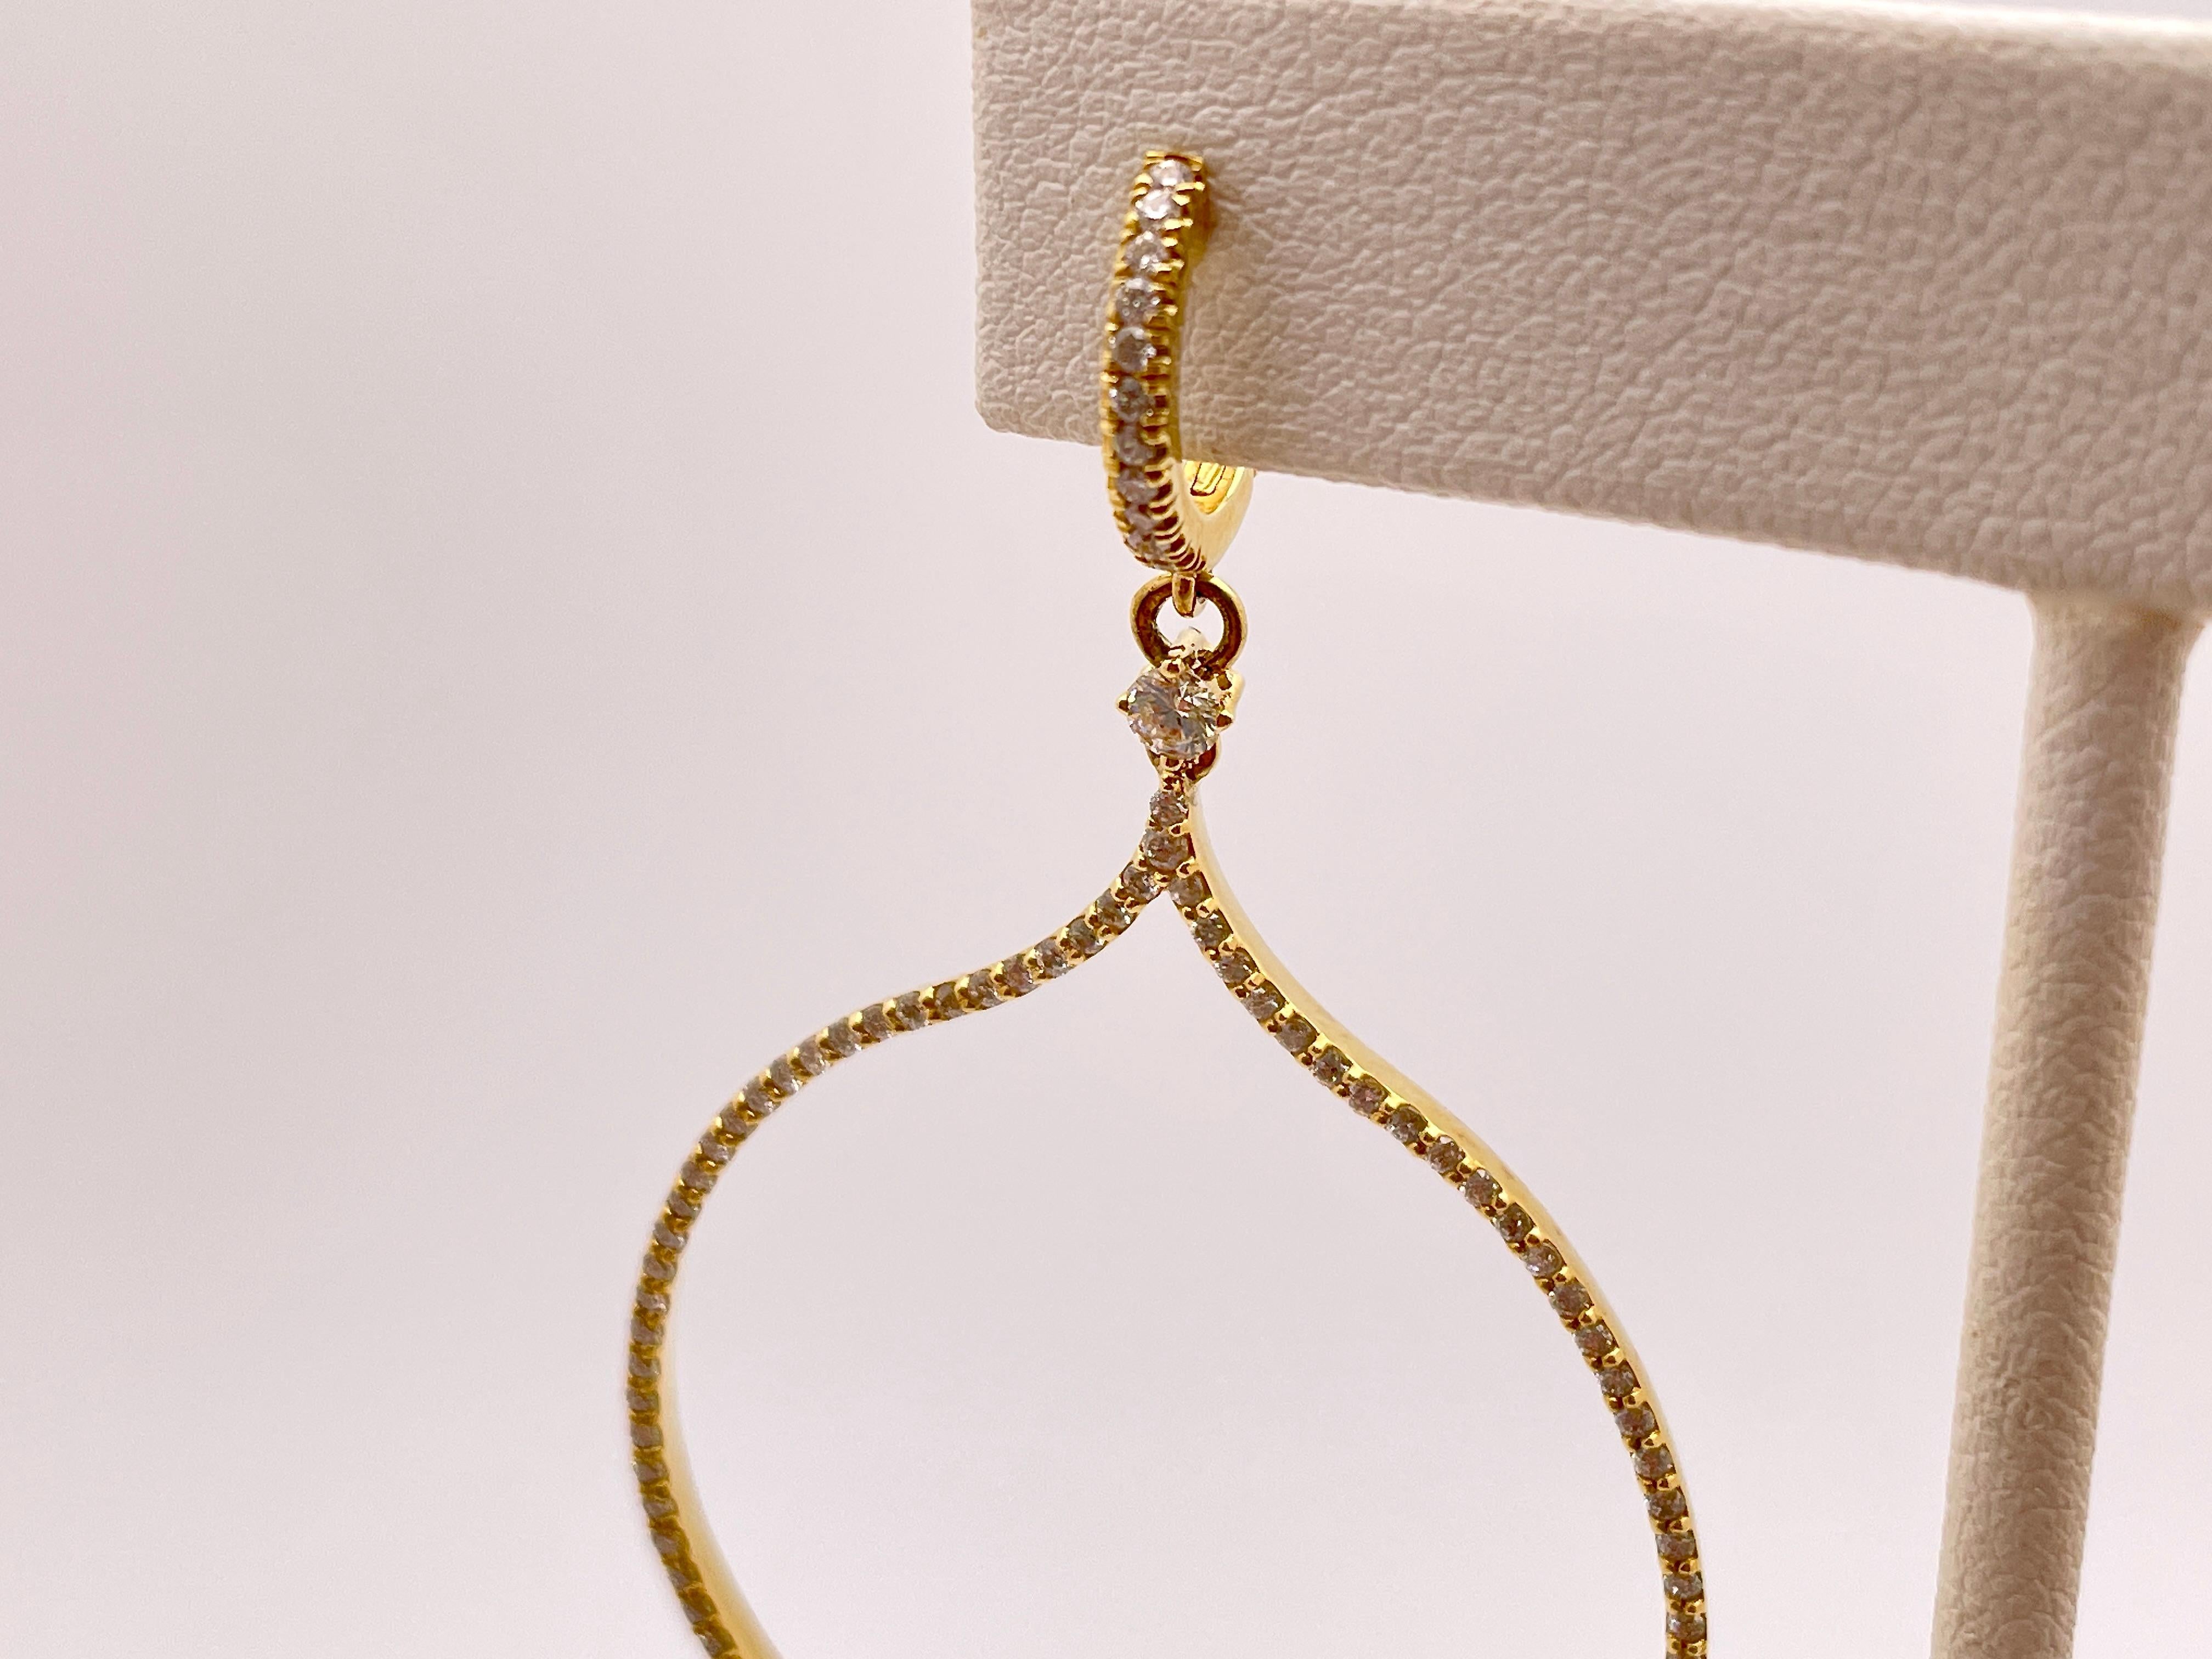 An original pair of 14K yellow gold diamond chandelier hoop earrings. Mounted with over 200 round brilliant cut diamonds weighing a total of approximately 2.50 CT, H-I color, VS1-VS2 clarity. 

Gross Weight: 10.00 Grams (5.00 Grams Each)
Size: 2.50